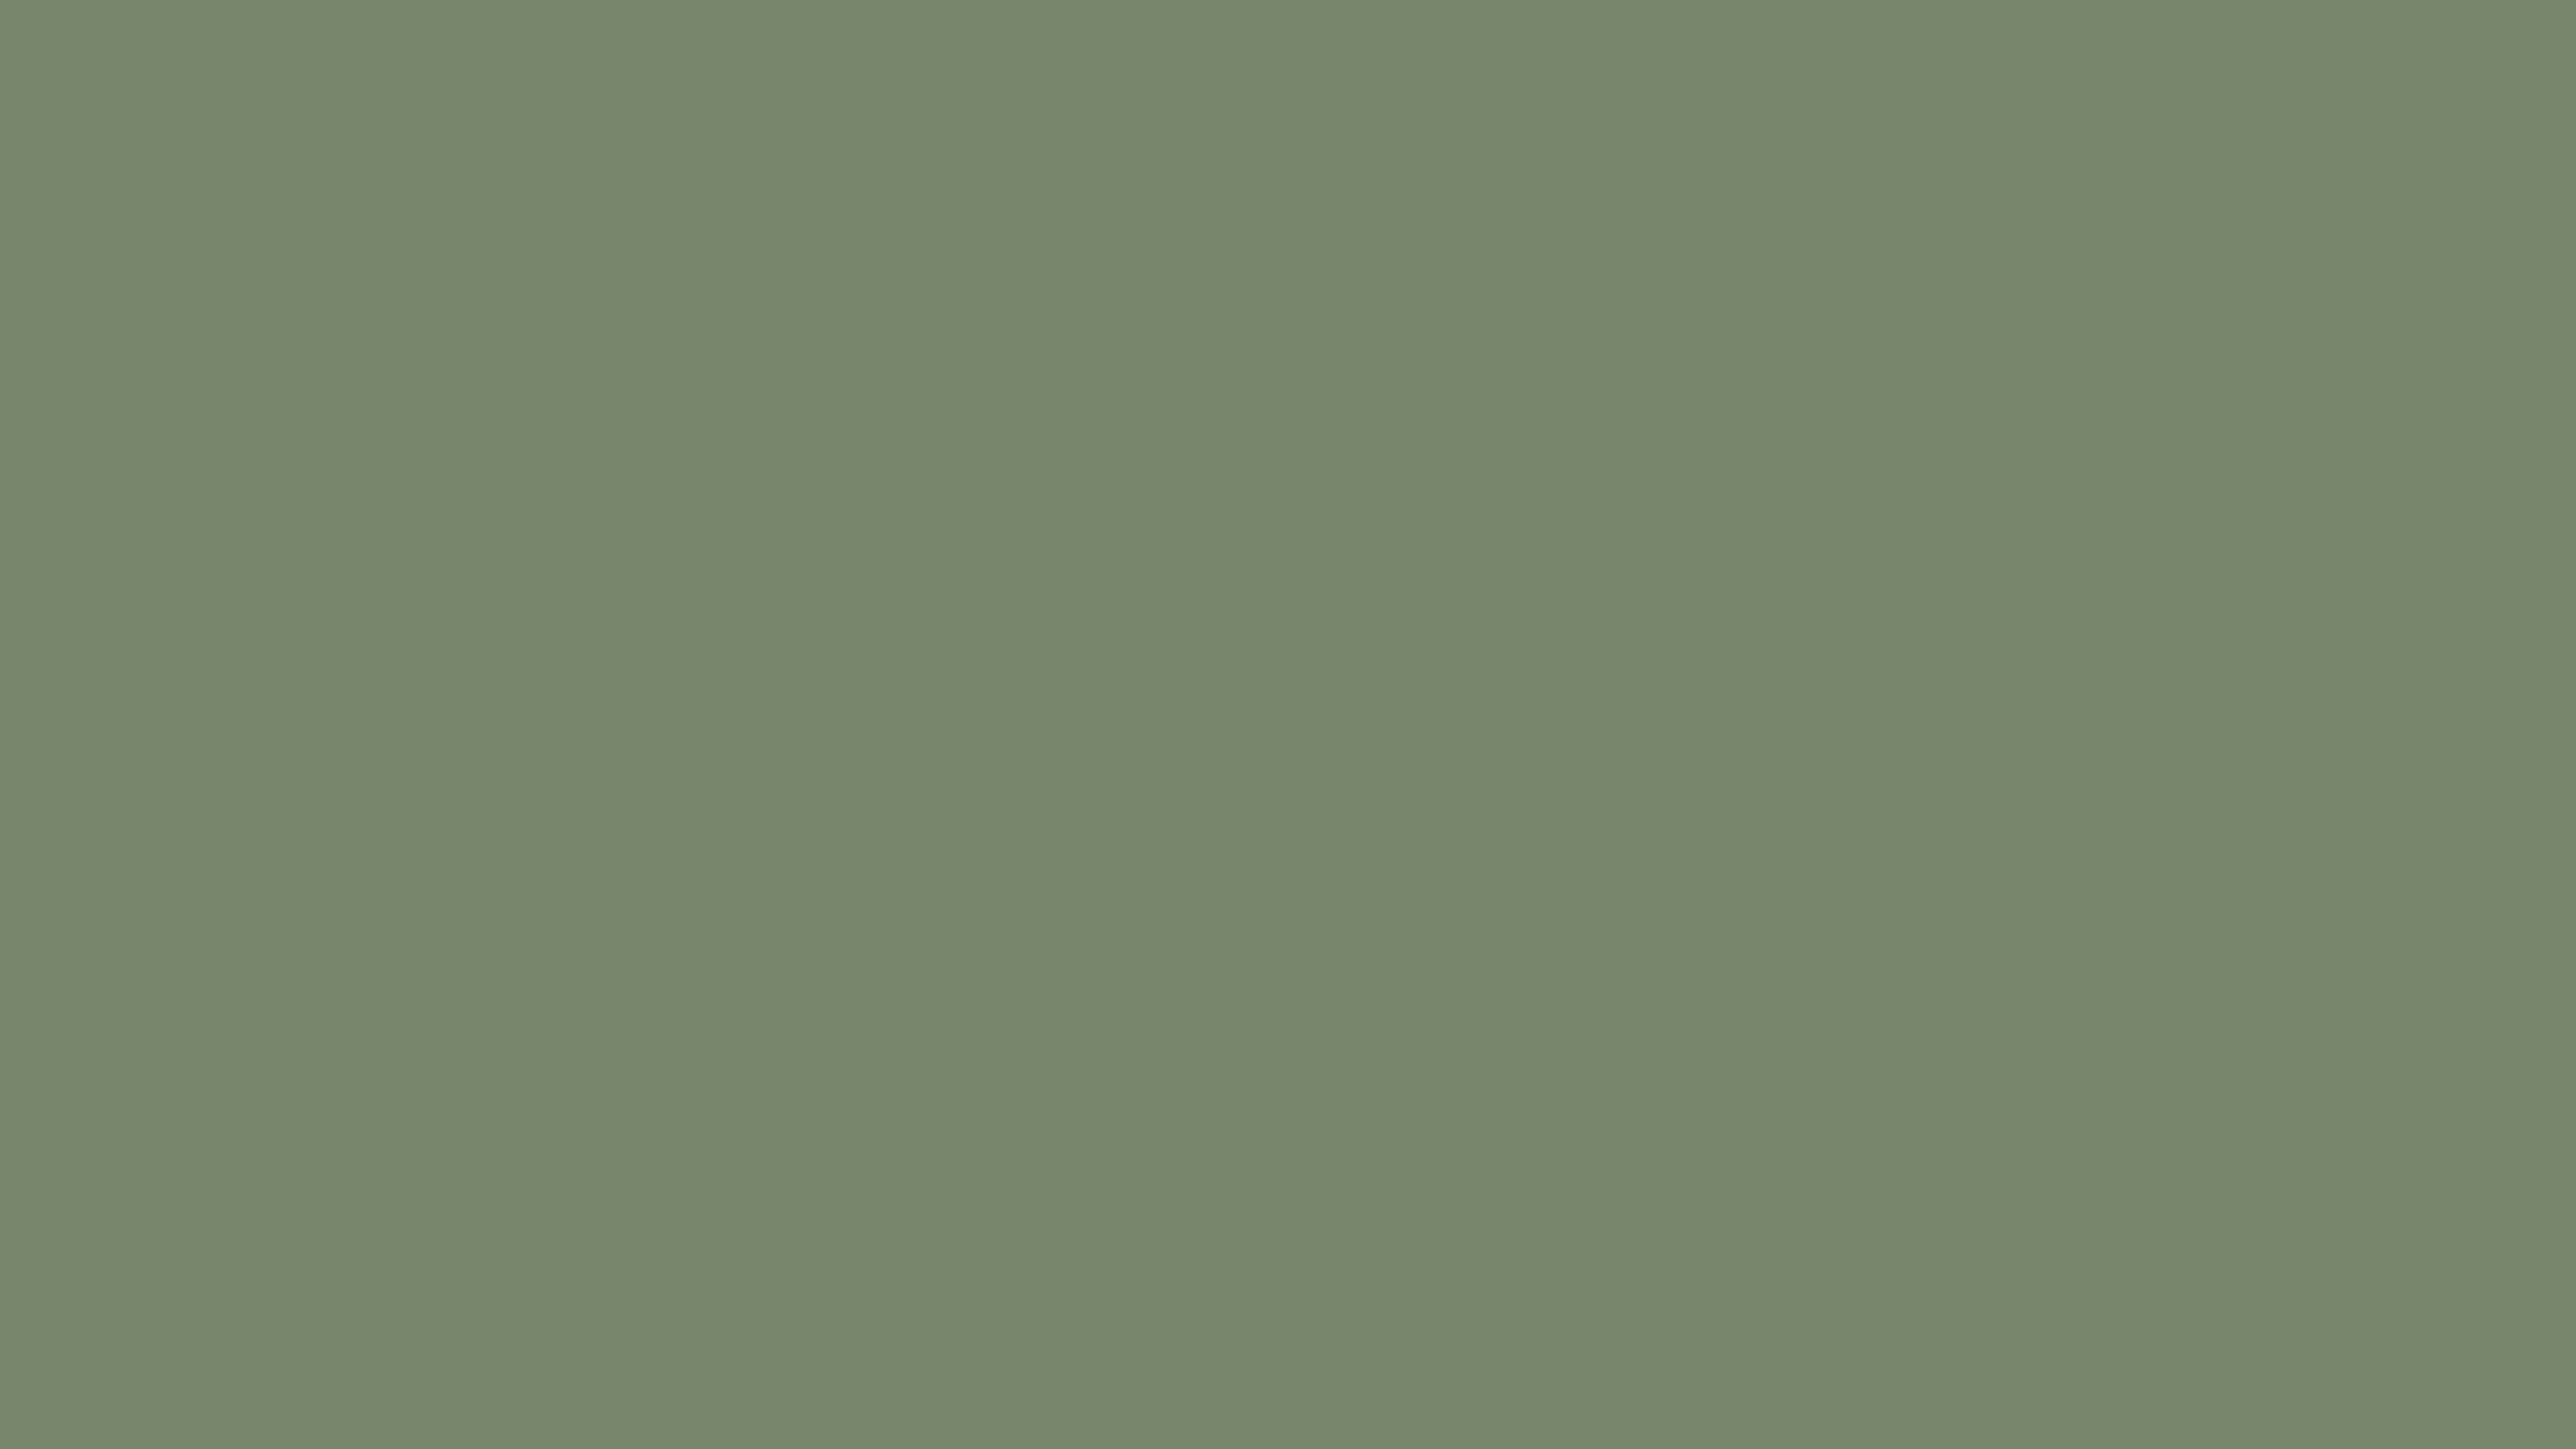 4096x2304 Camouflage Green Solid Color Background